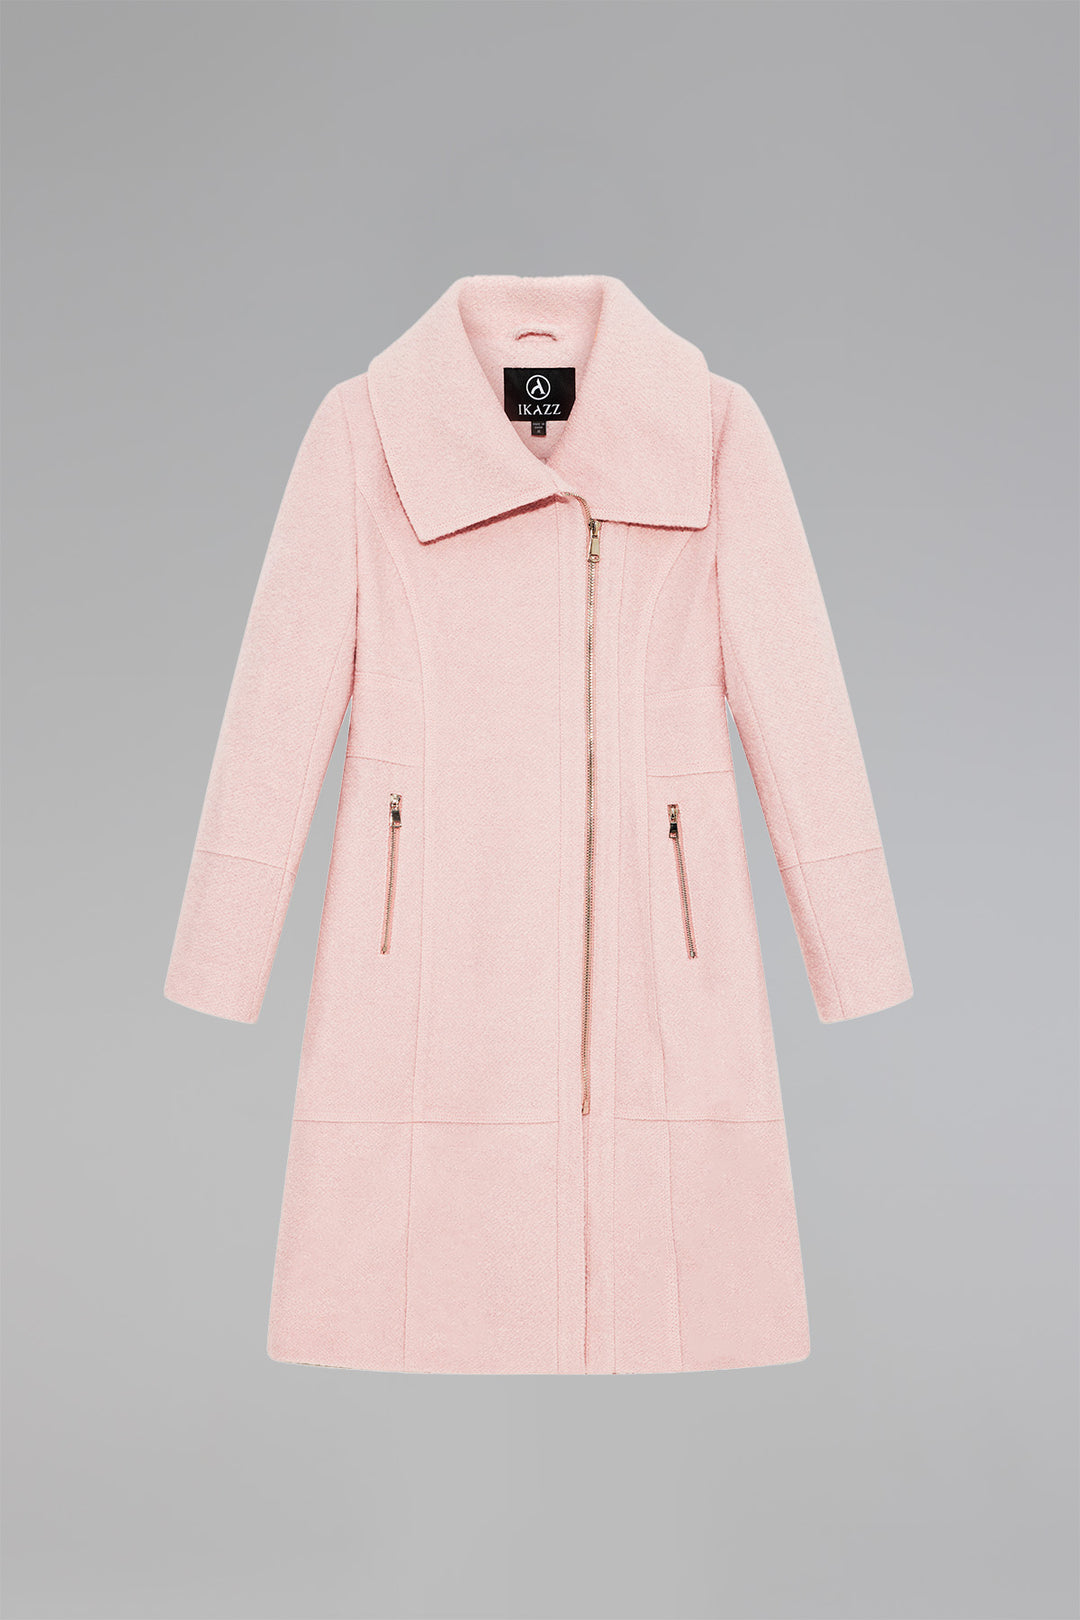 Pink Perfection 💕Add a touch of refined glamour to your wardrobe with this  exquisite pink wool coat. Shop at ikazzstore.com